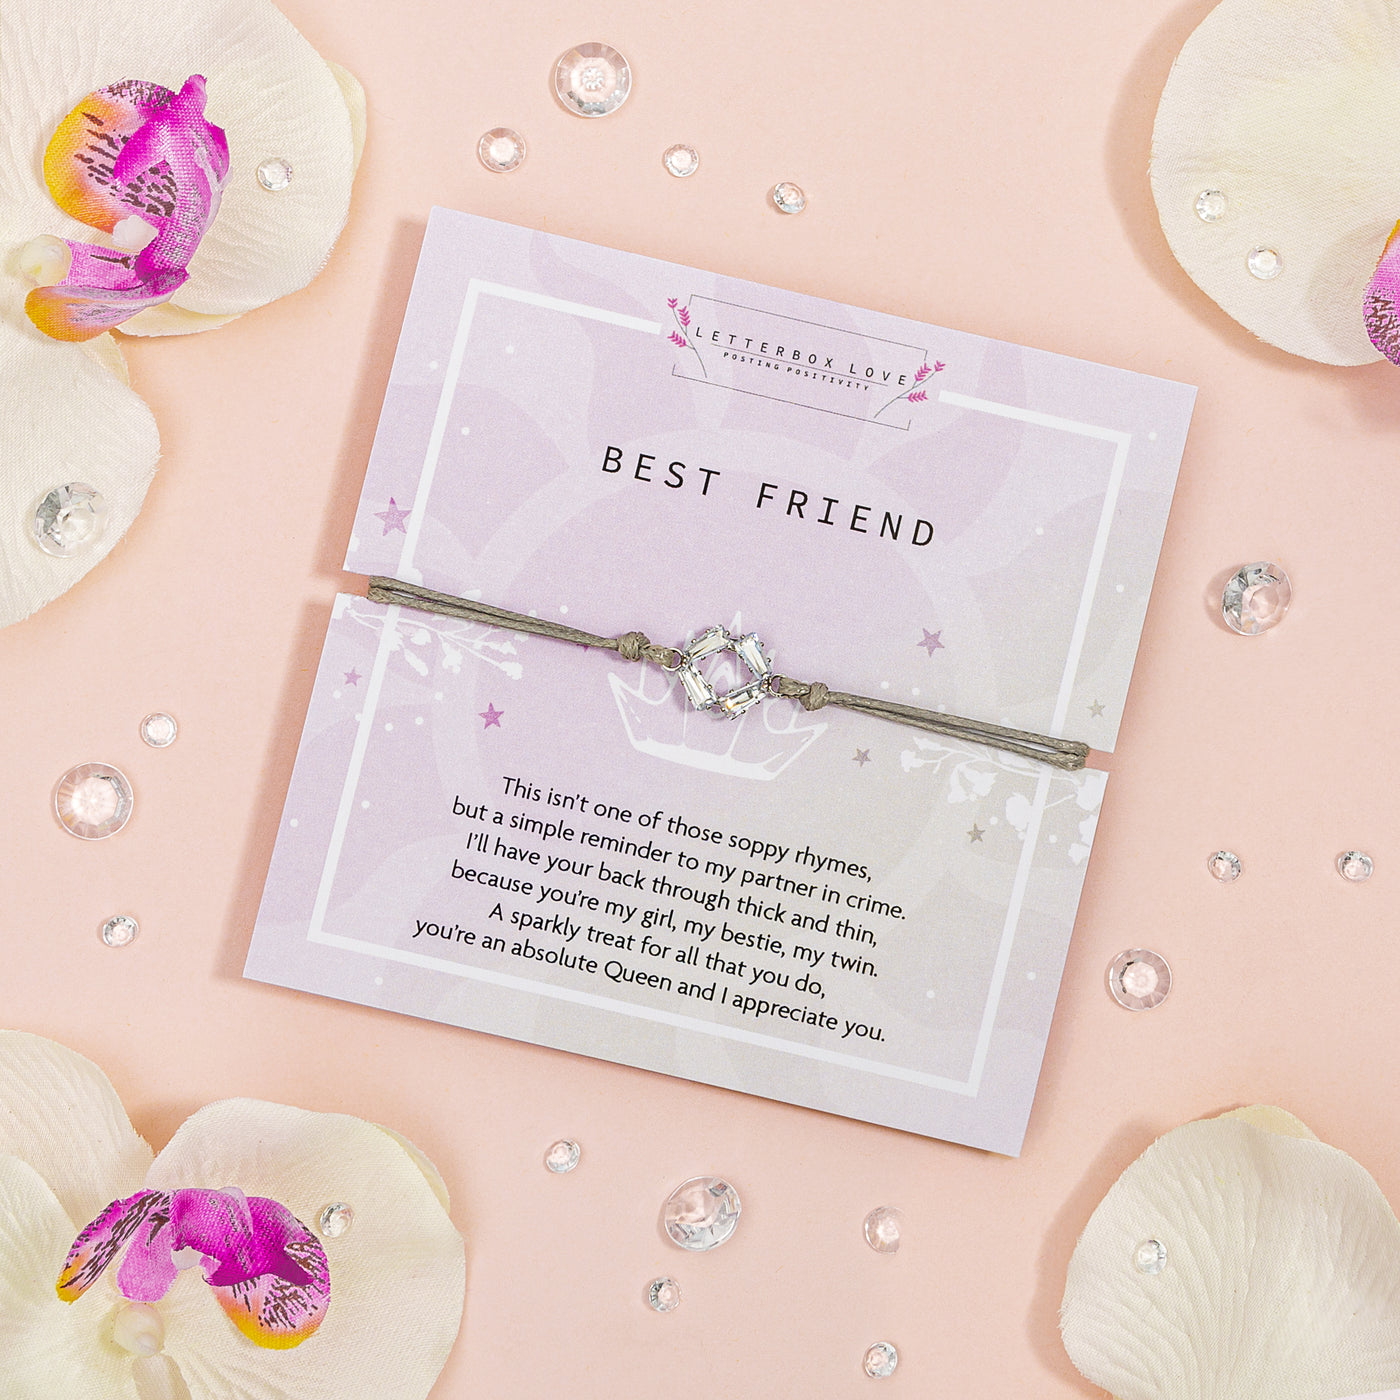 BEST FRIEND' bracelet with a shimmering charm, presented on a lilac card adorned with stars and a touching poem.